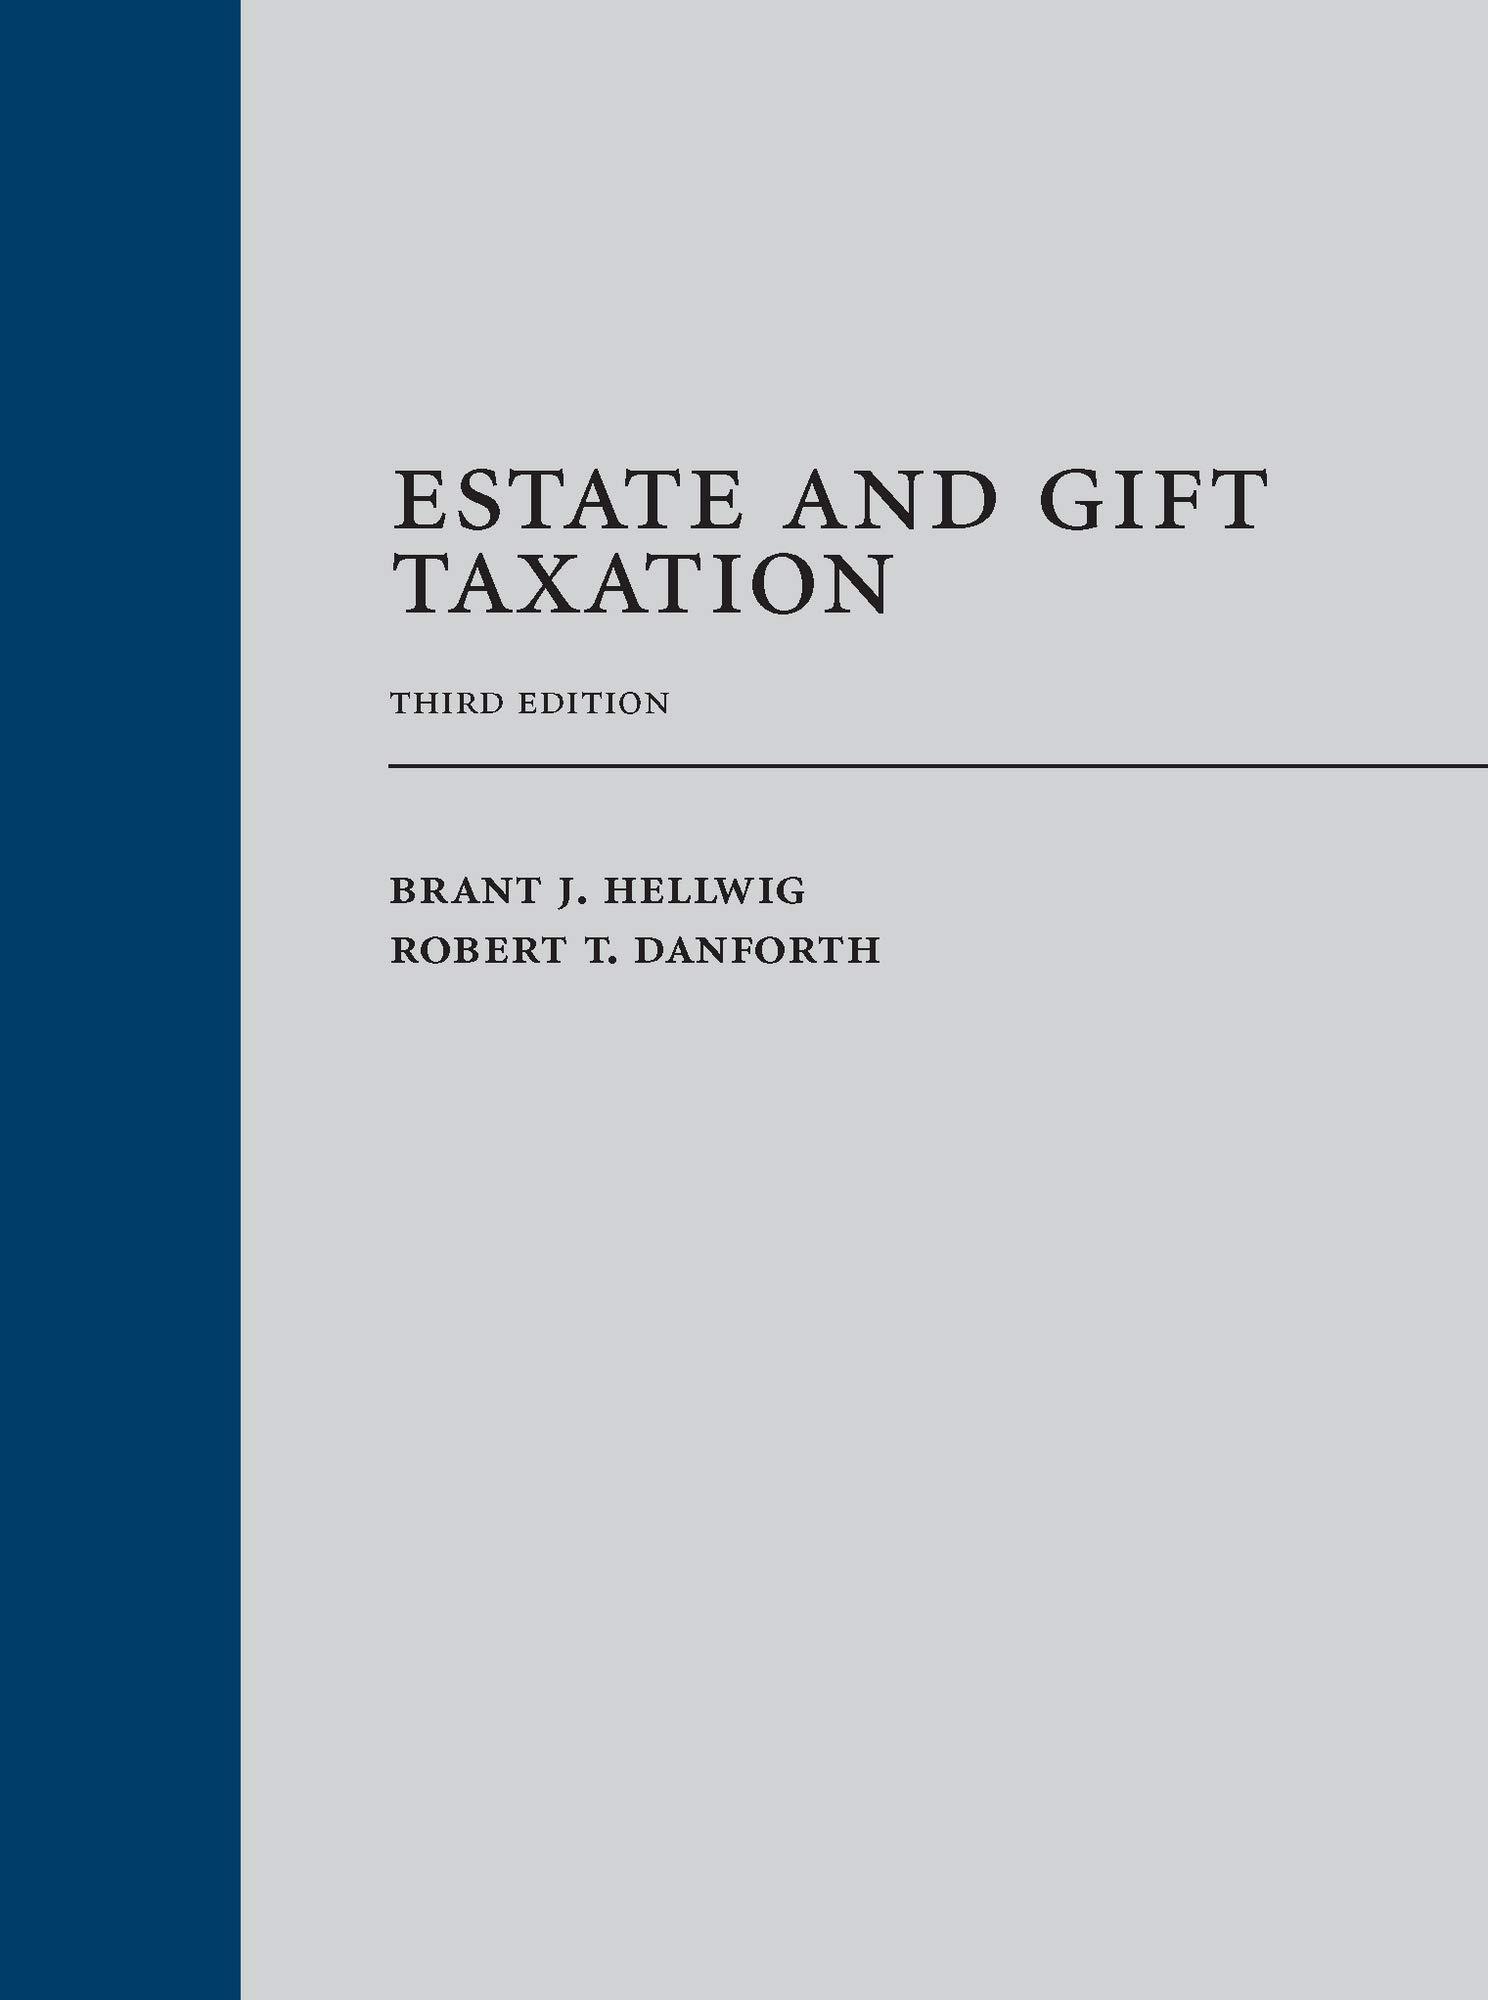 estate and gift taxation 3rd edition brant hellwig, robert danforth 1531012167, 9781531012168